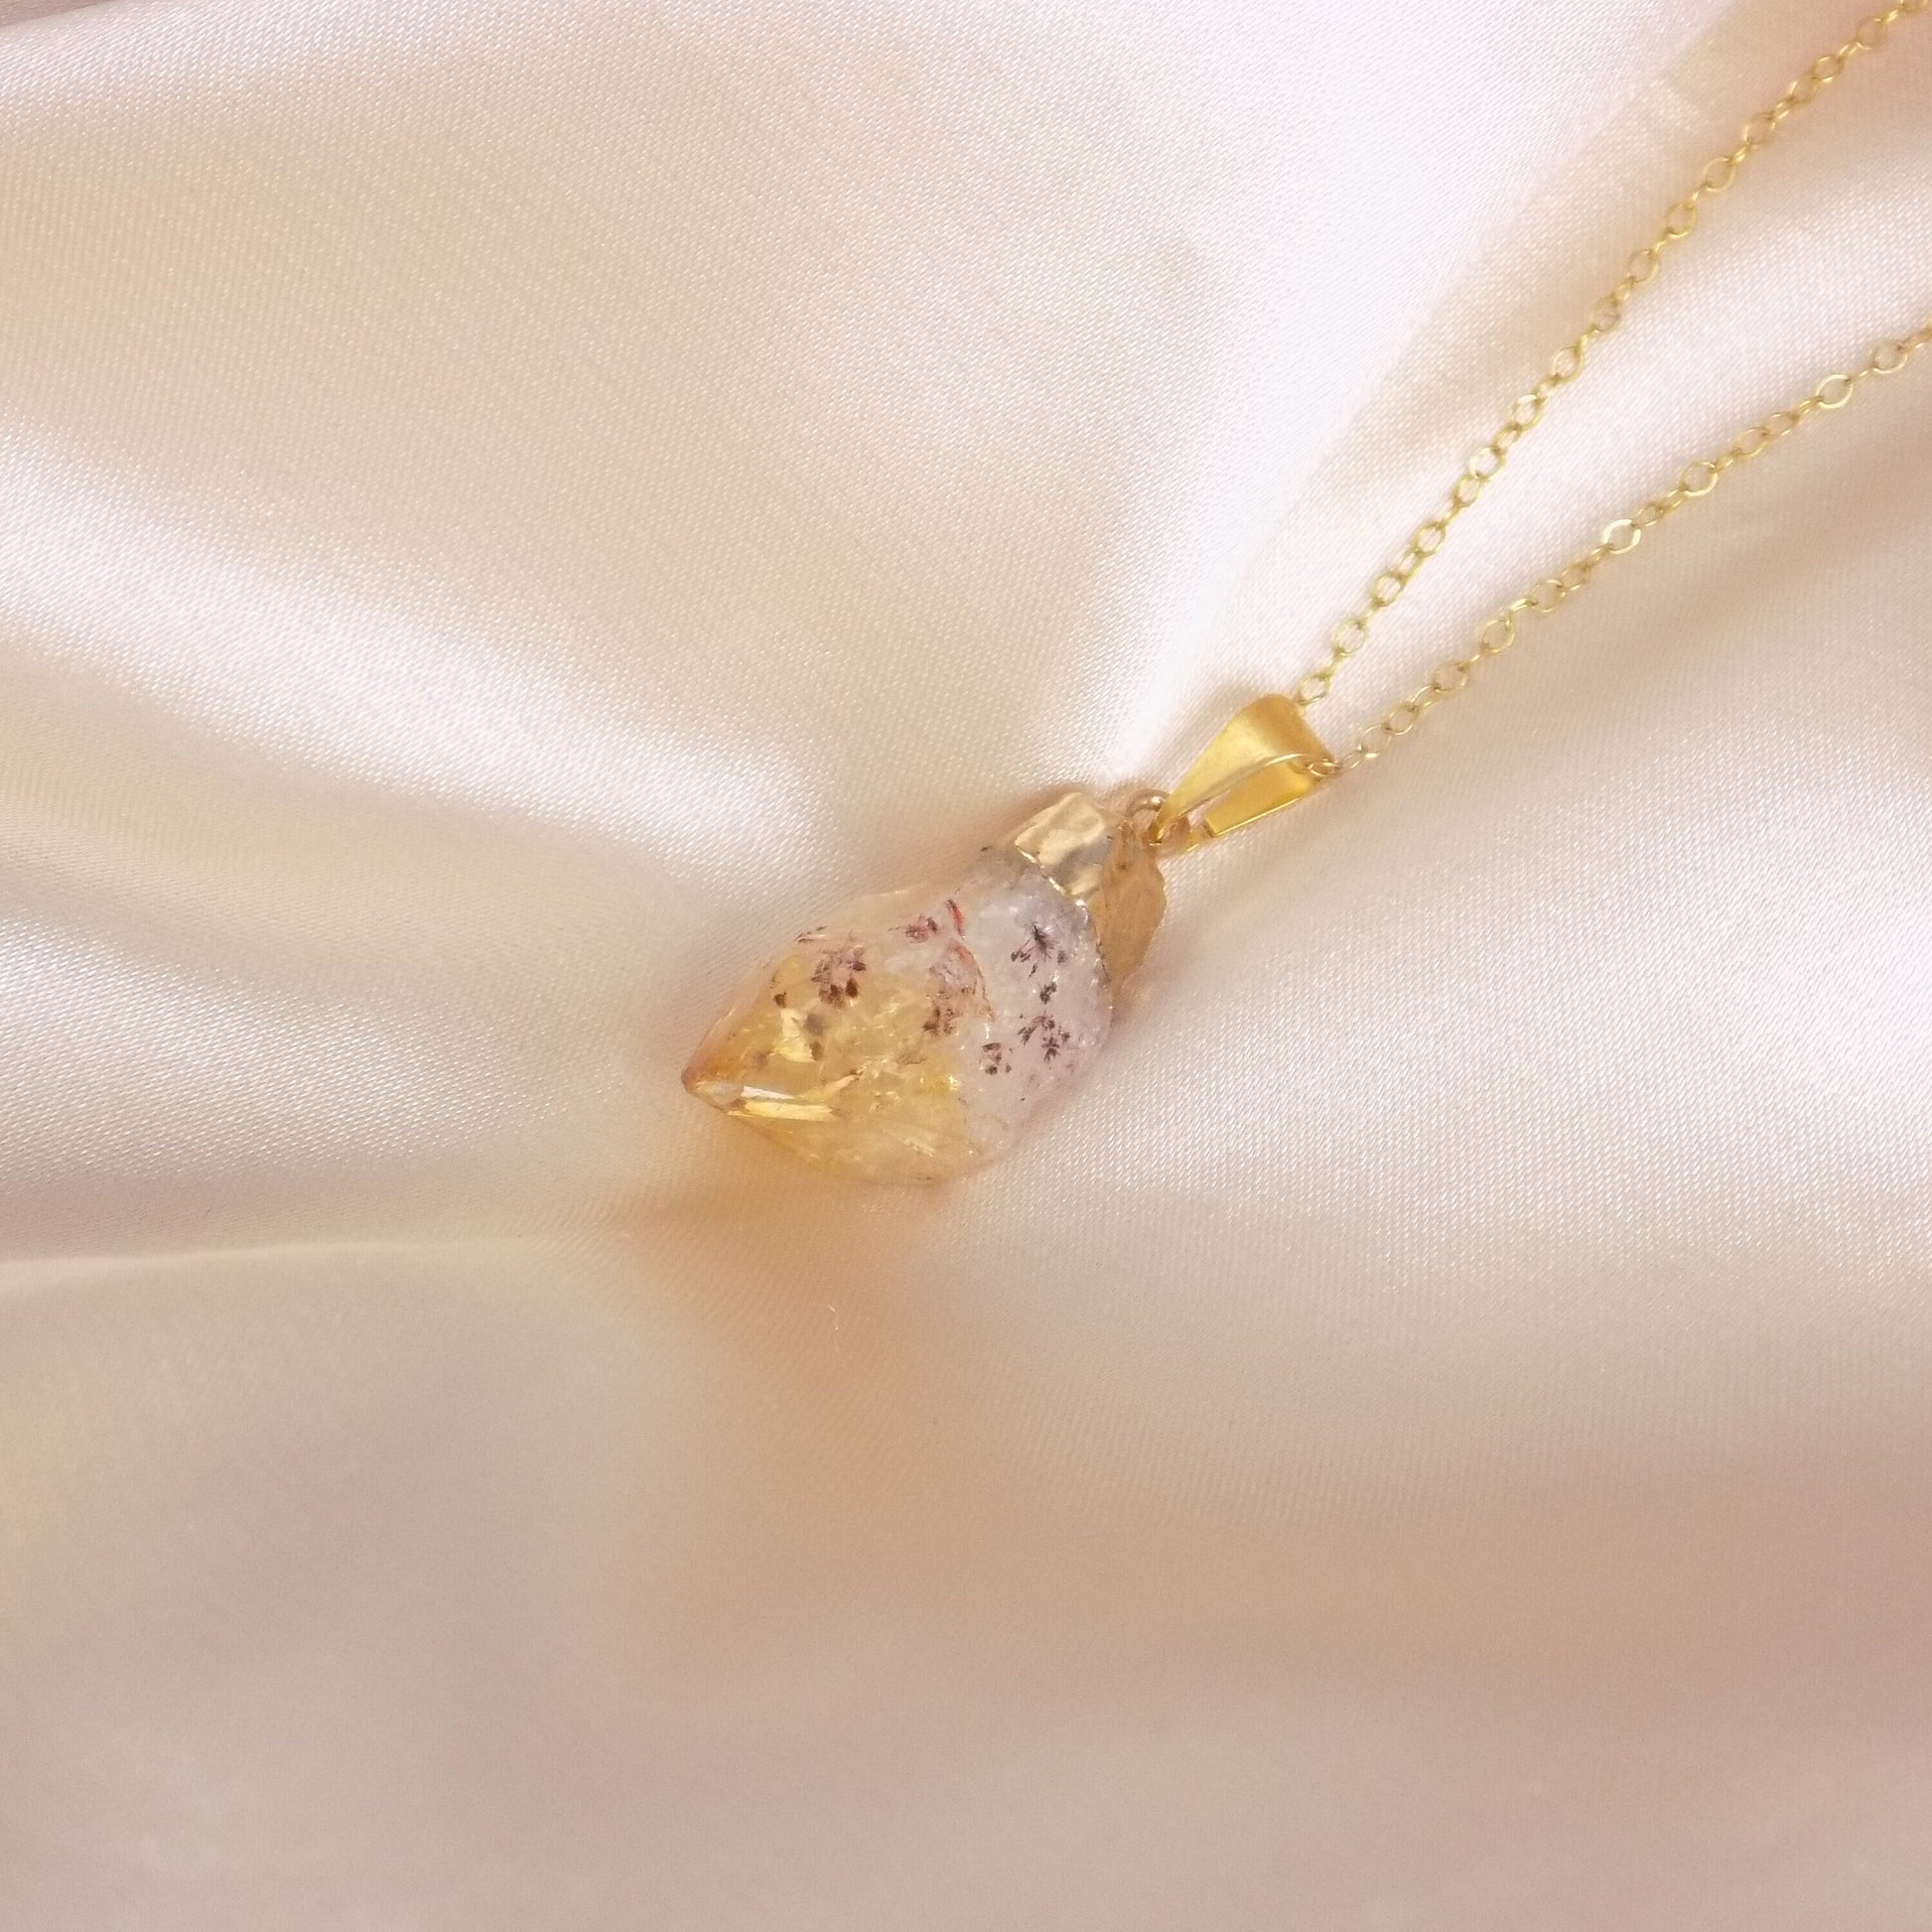 Yellow Citrine Crystal Necklace Gold - November Birthstone Jewelry - Christmas Gift For Her - G15-252